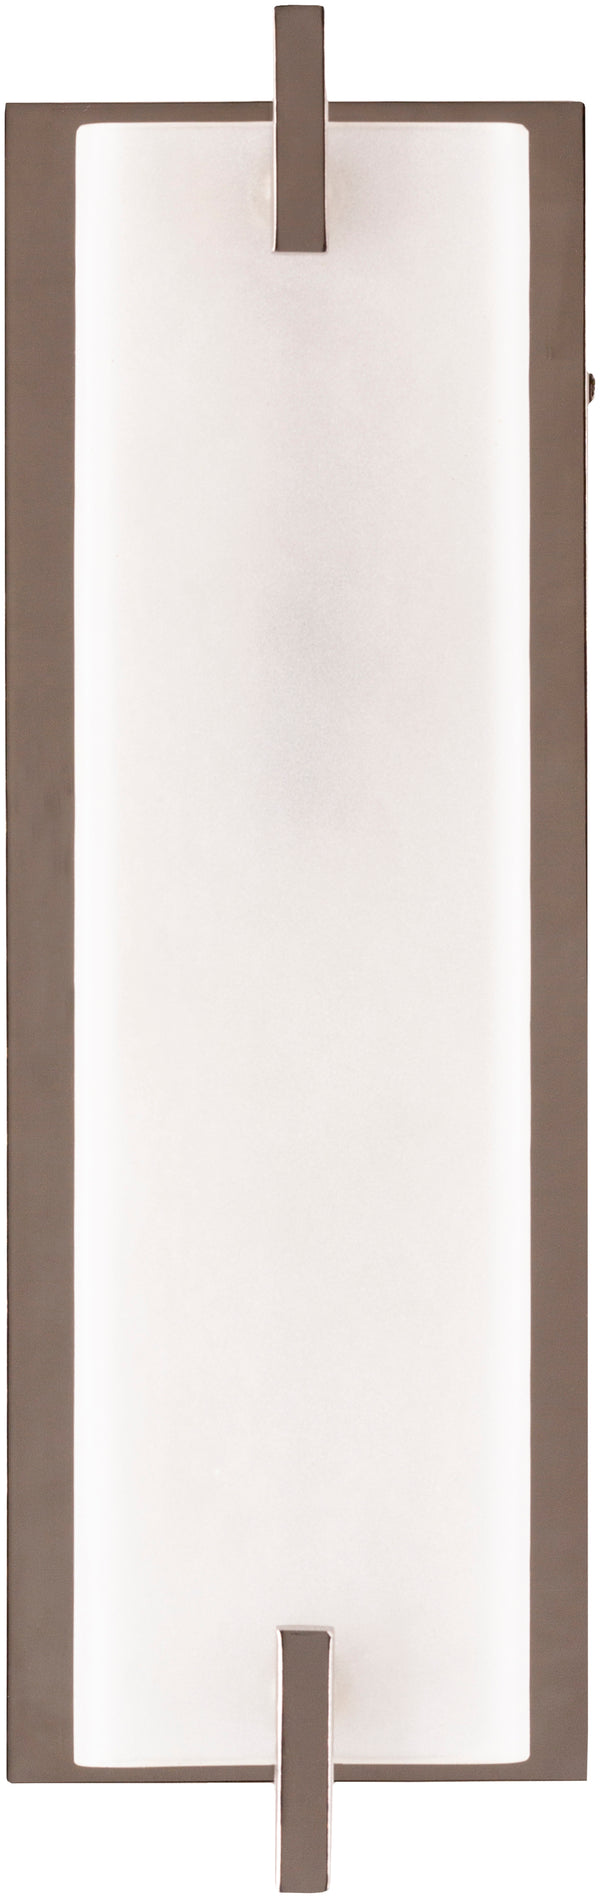 Doby DBY-001 16"H x 5"W x 6"D Wall Sconce